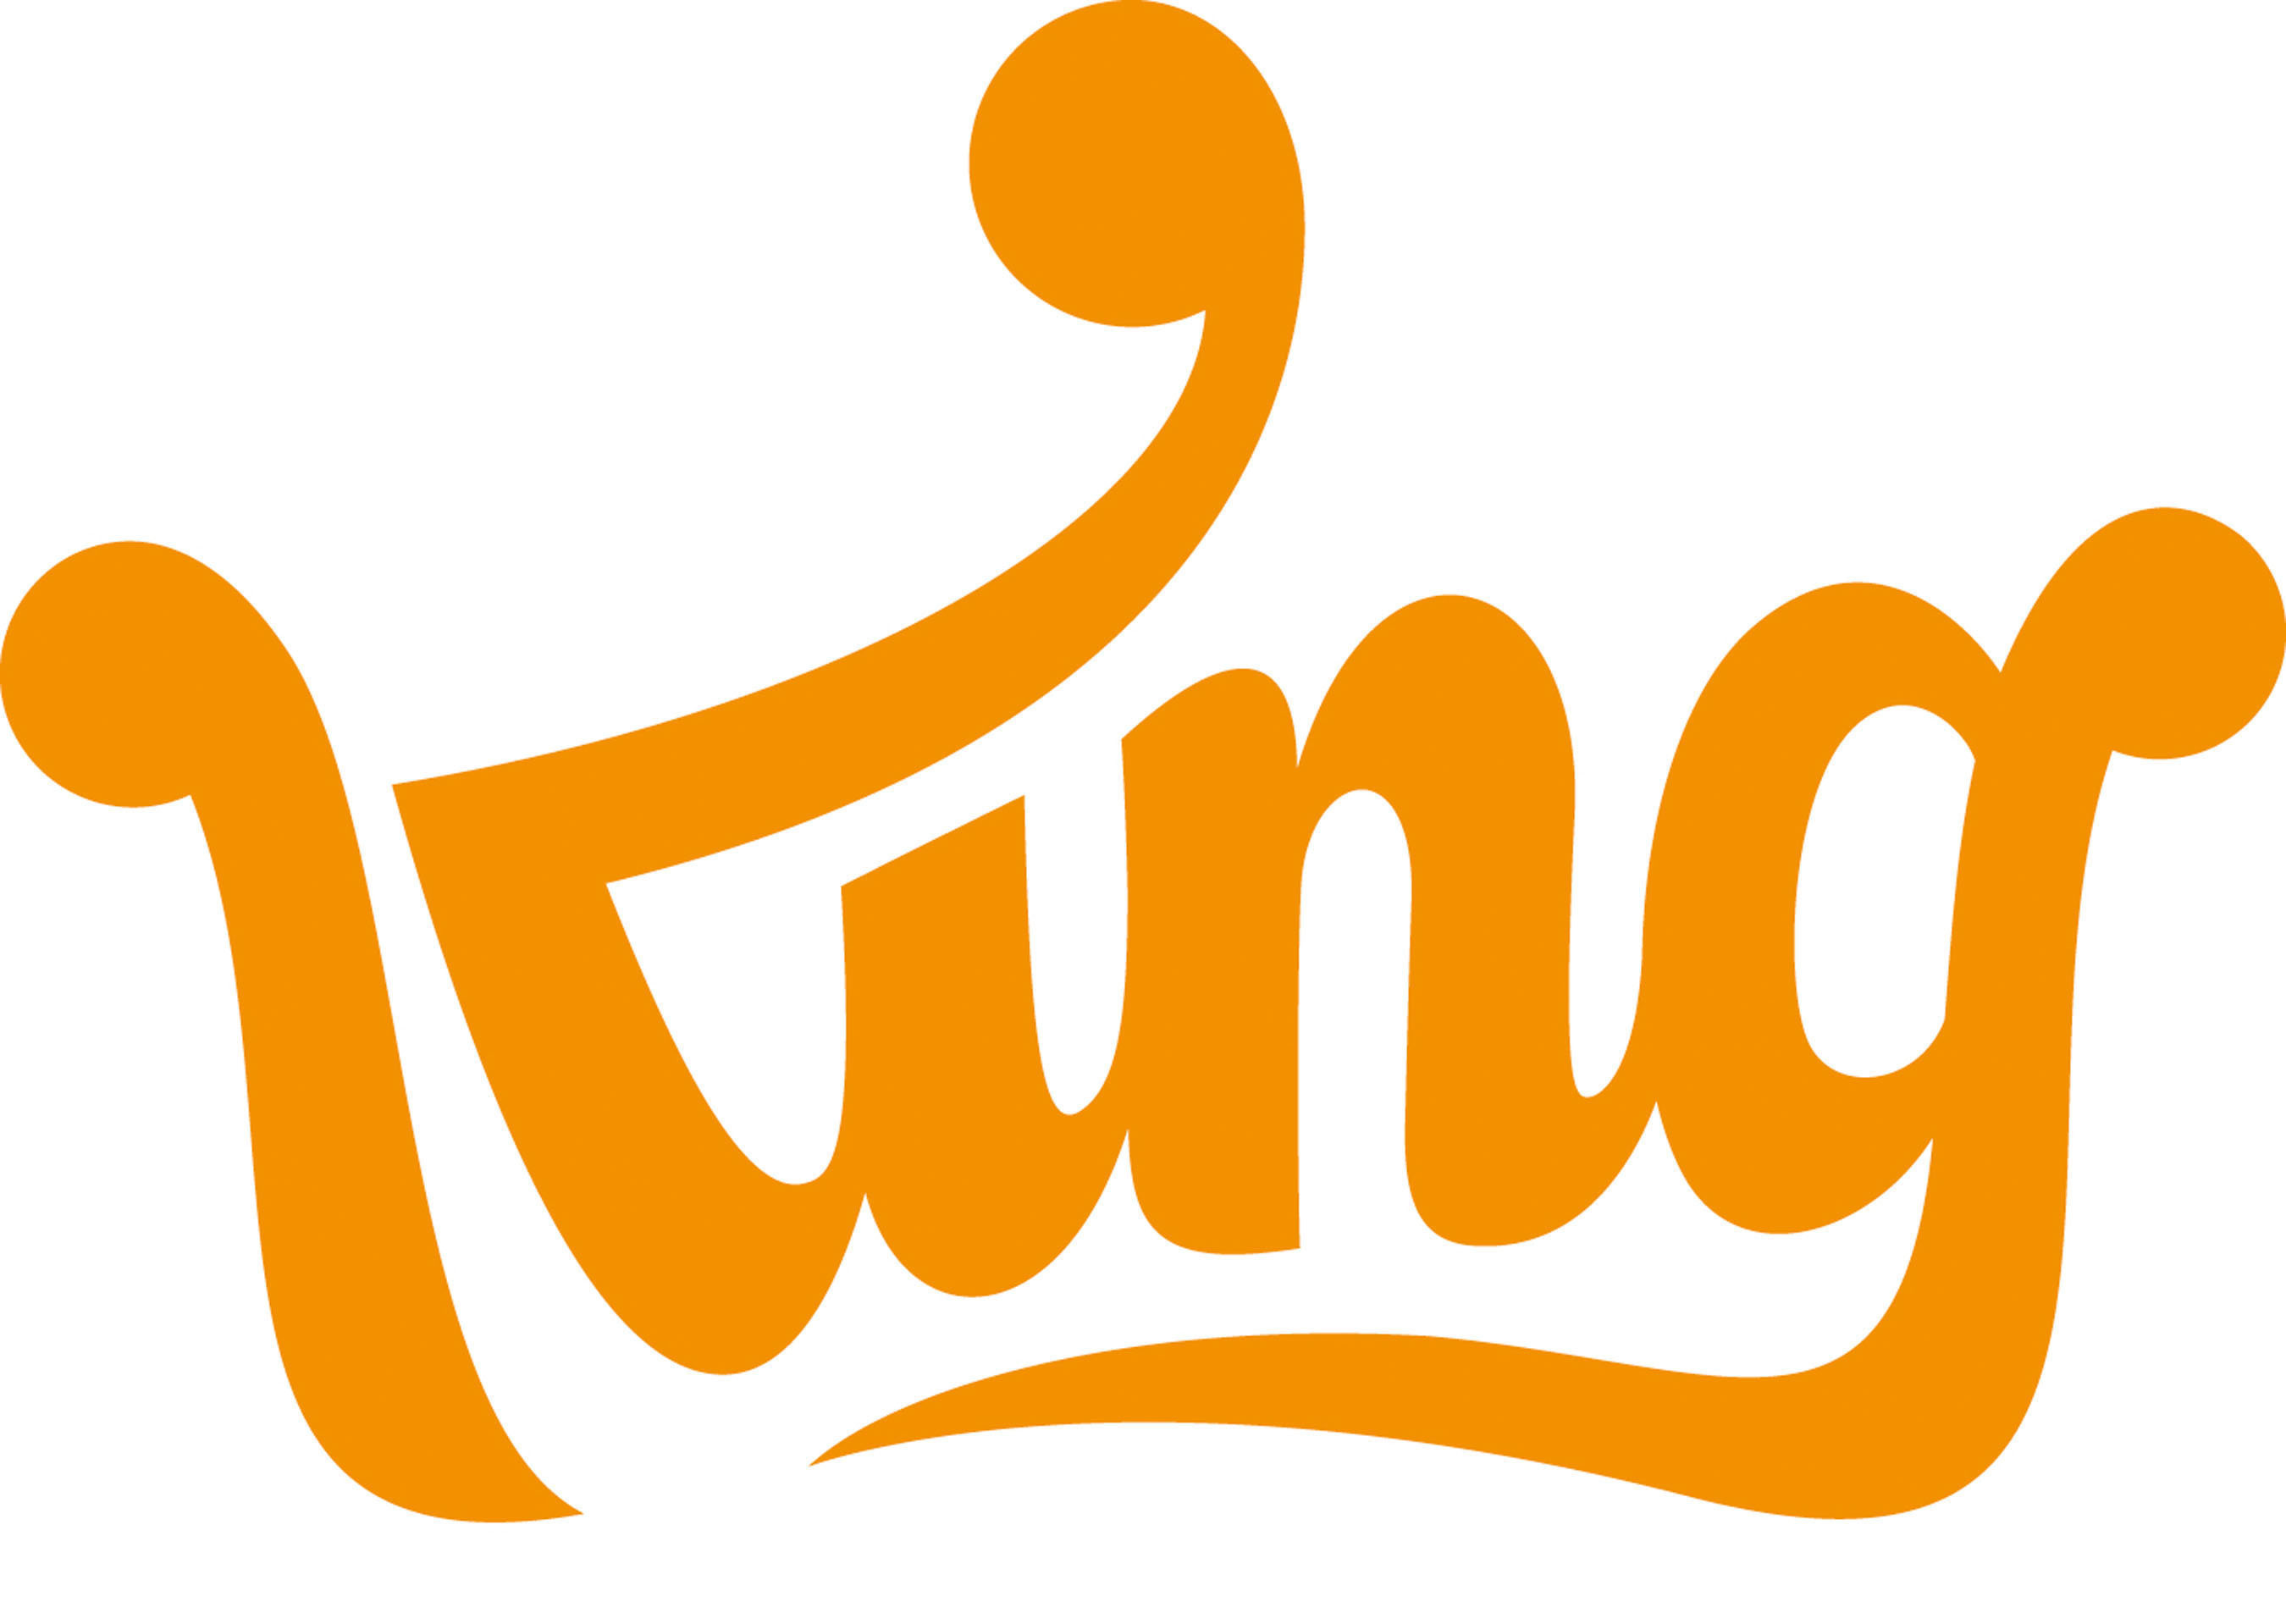 King Logo. King is the world-wide leader in cross-platform, bite-sized games. The company has grown rapidly to become one of the largest developers of games in the world on Facebook and mobile platforms. (PRNewsFoto/King) (PRNewsFoto/KING)